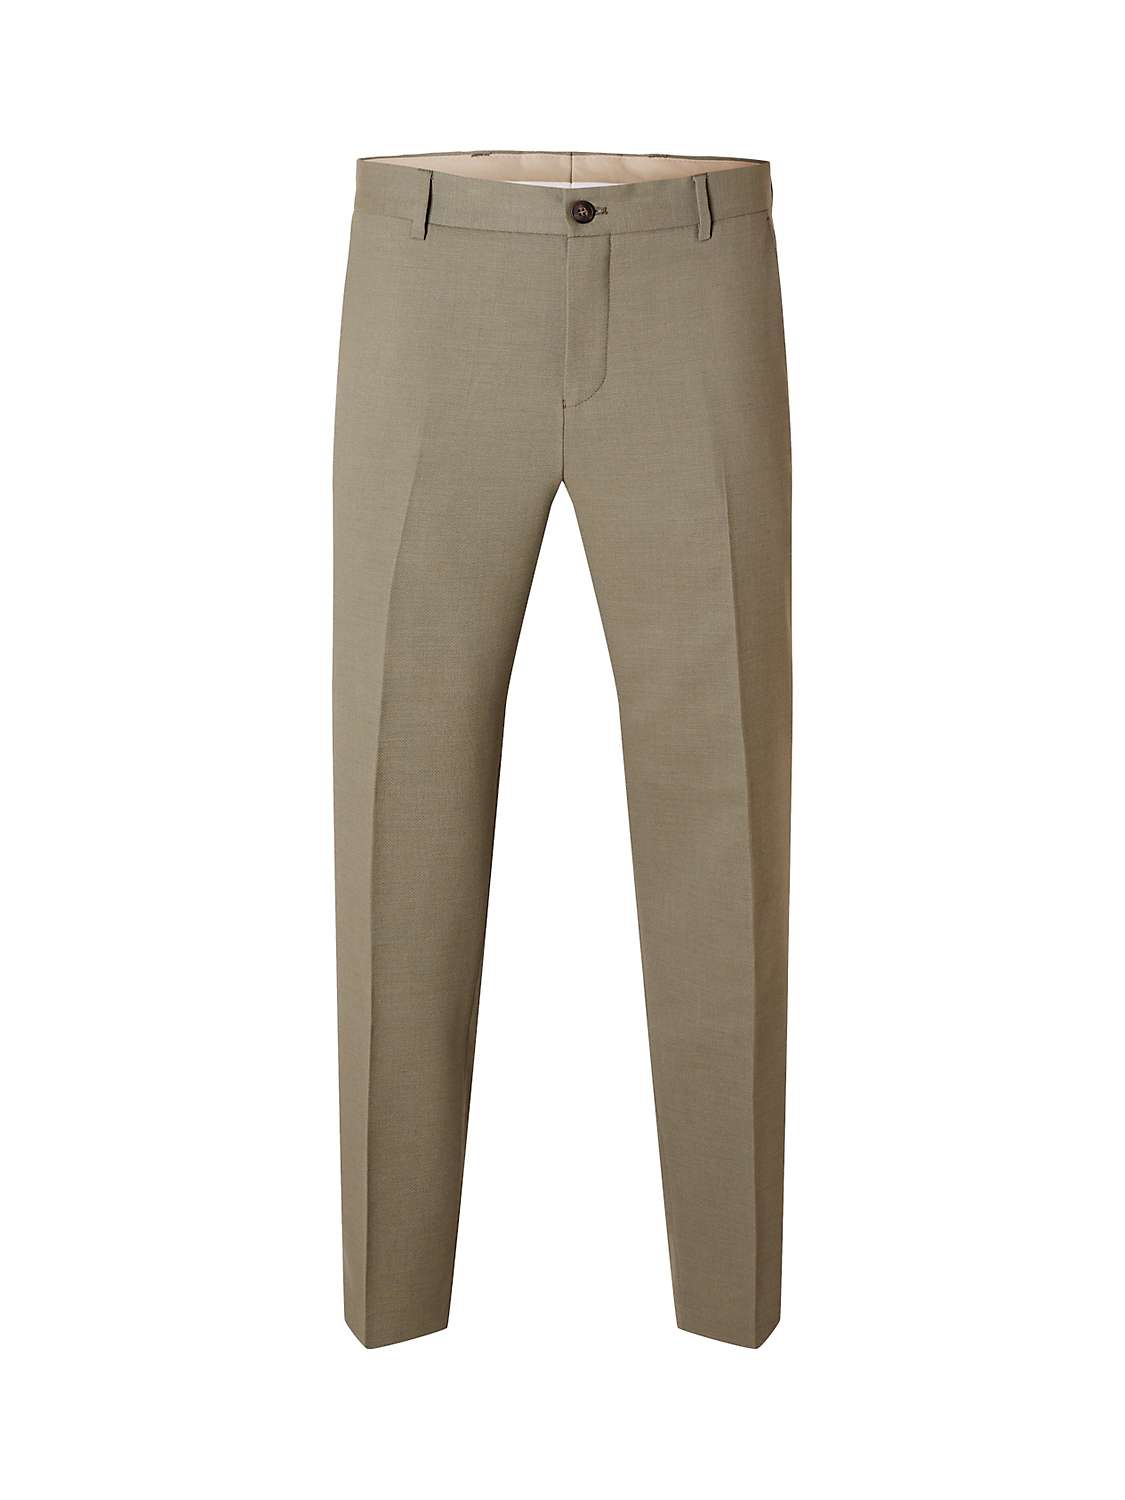 Buy SELECTED HOMME Neil Slim Fit Trousers, Vetiver Online at johnlewis.com